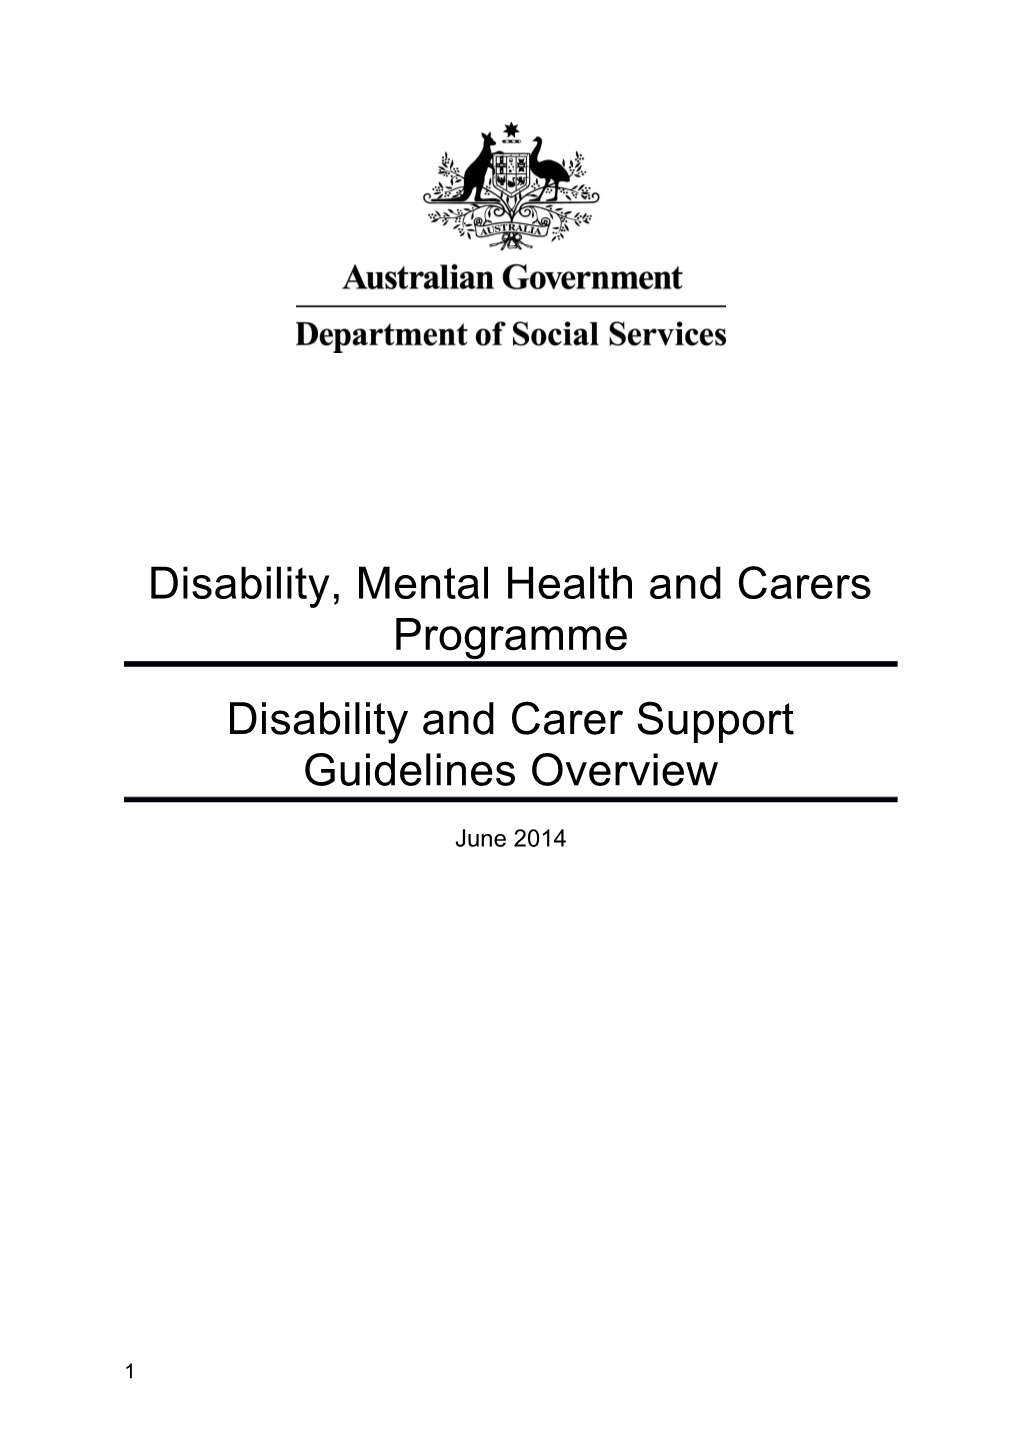 Disability and Carer Support Programme Guidelines